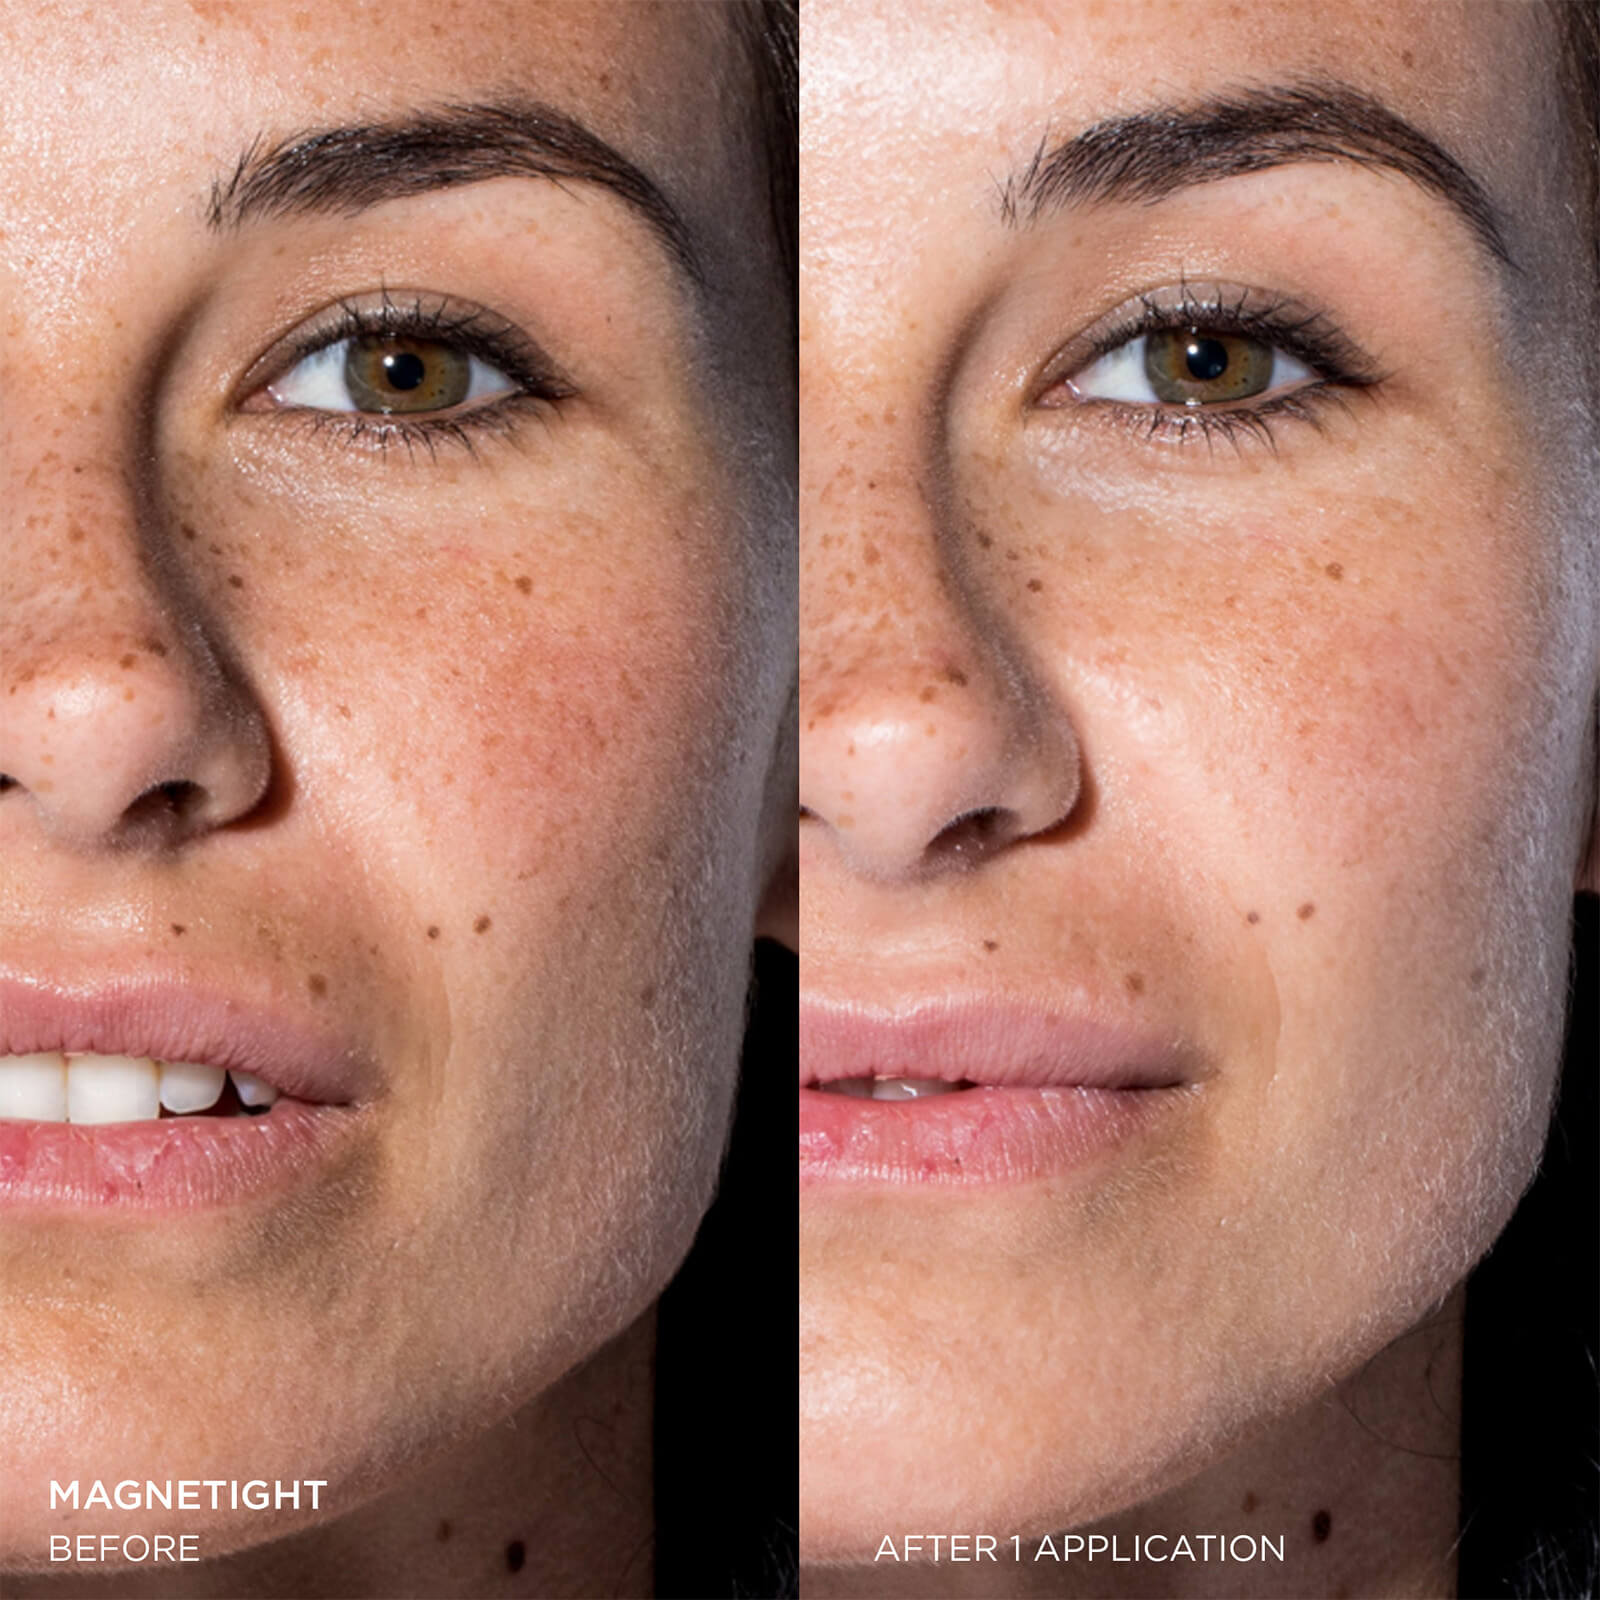 magnetight before, after 1 application